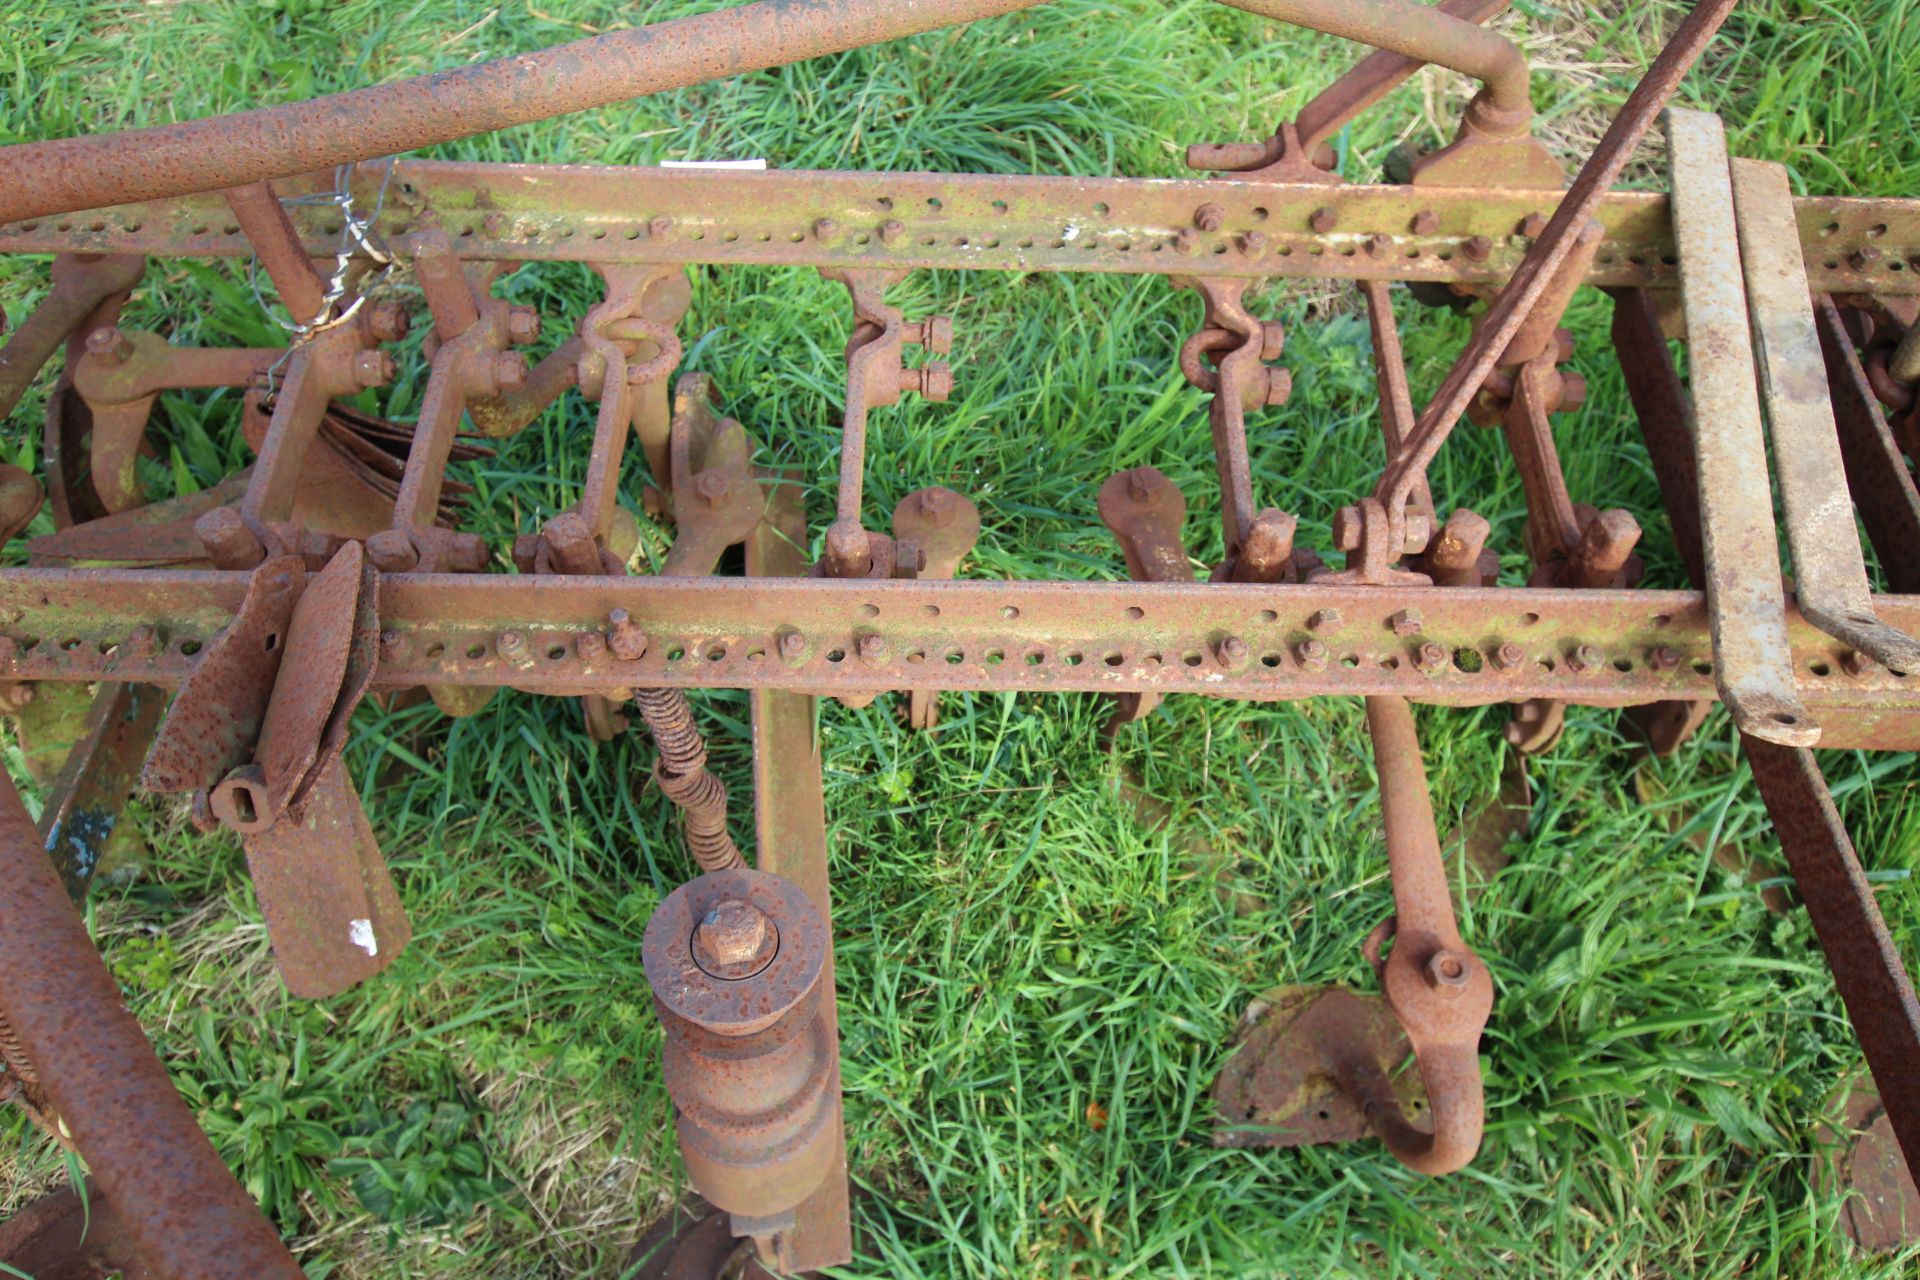 Ferguson BKE-20 extended steerage hoe. Serial number 3215. Owned from new. - Image 8 of 12